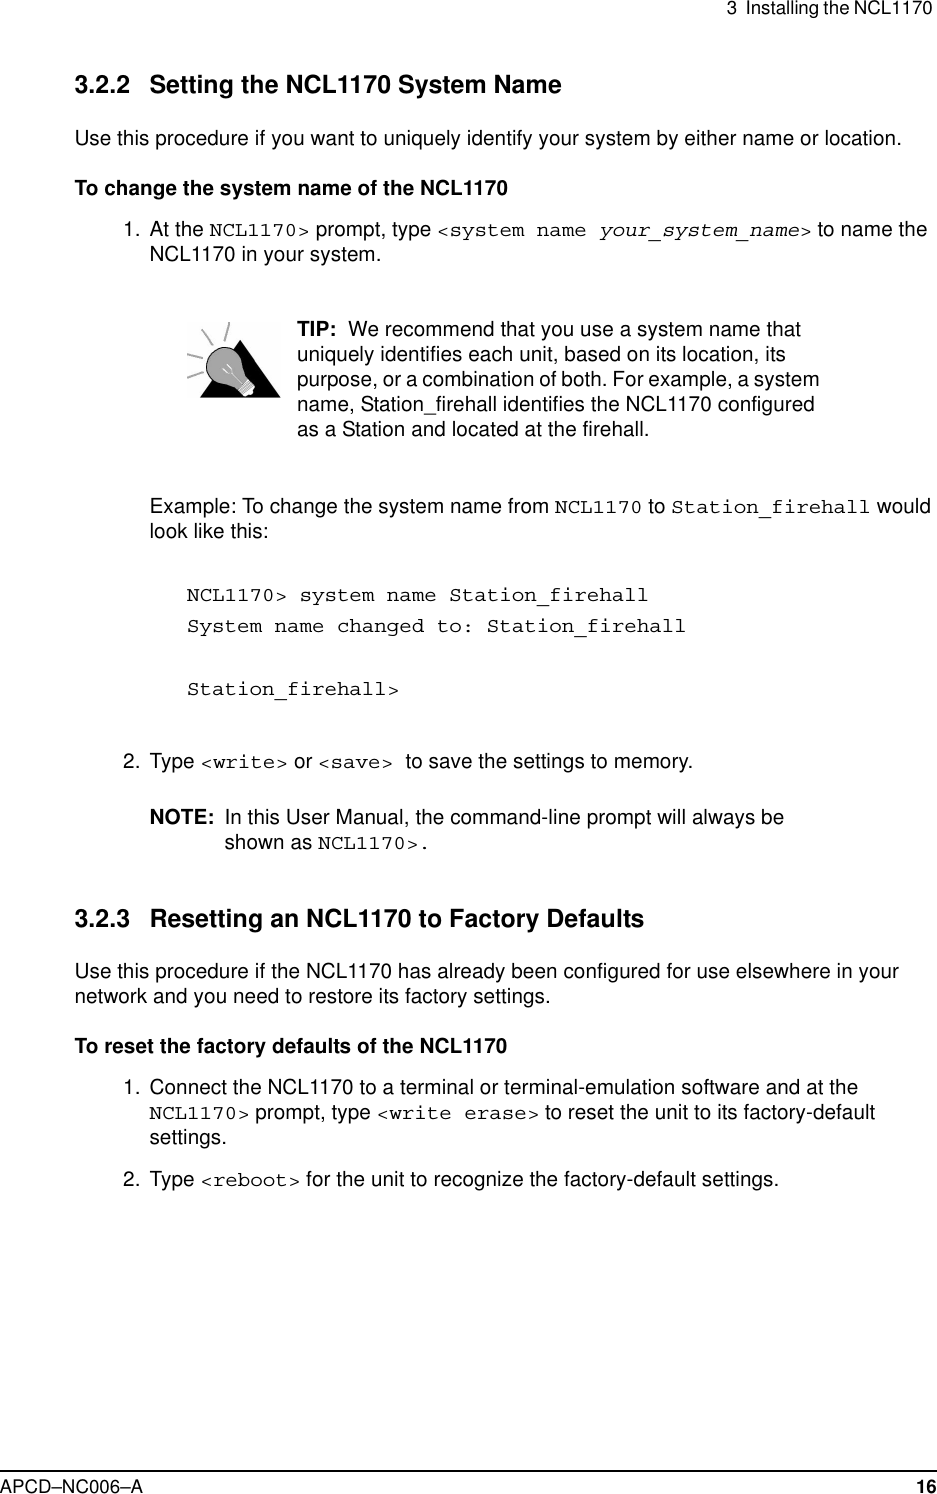 3 Installing the NCL1170APCD–NC006–A 163.2.2 Setting the NCL1170 System NameUse this procedure if you want to uniquely identify your system by either name or location.To change the system name of the NCL11701. At the NCL1170&gt; prompt, type &lt;system name your_system_name&gt;to name theNCL1170 in your system.TIP: We recommend that you use a system name thatuniquely identifies each unit, based on its location, itspurpose, or a combination of both. For example, a systemname, Station_firehall identifies the NCL1170 configuredas a Station and located at the firehall.Example: To change the system name from NCL1170 to Station_firehall wouldlook like this:NCL1170&gt; system name Station_firehallSystem name changed to: Station_firehallStation_firehall&gt;2. Type &lt;write&gt; or &lt;save&gt; to save the settings to memory.NOTE: In this User Manual, the command-line prompt will always beshown as NCL1170&gt;.3.2.3 Resetting an NCL1170 to Factory DefaultsUse this procedure if the NCL1170 has already been configured for use elsewhere in yournetwork and you need to restore its factory settings.To reset the factory defaults of the NCL11701. Connect the NCL1170 to a terminal or terminal-emulation software and at theNCL1170&gt; prompt, type &lt;write erase&gt; to reset the unit to its factory-defaultsettings.2. Type &lt;reboot&gt; for the unit to recognize the factory-default settings.